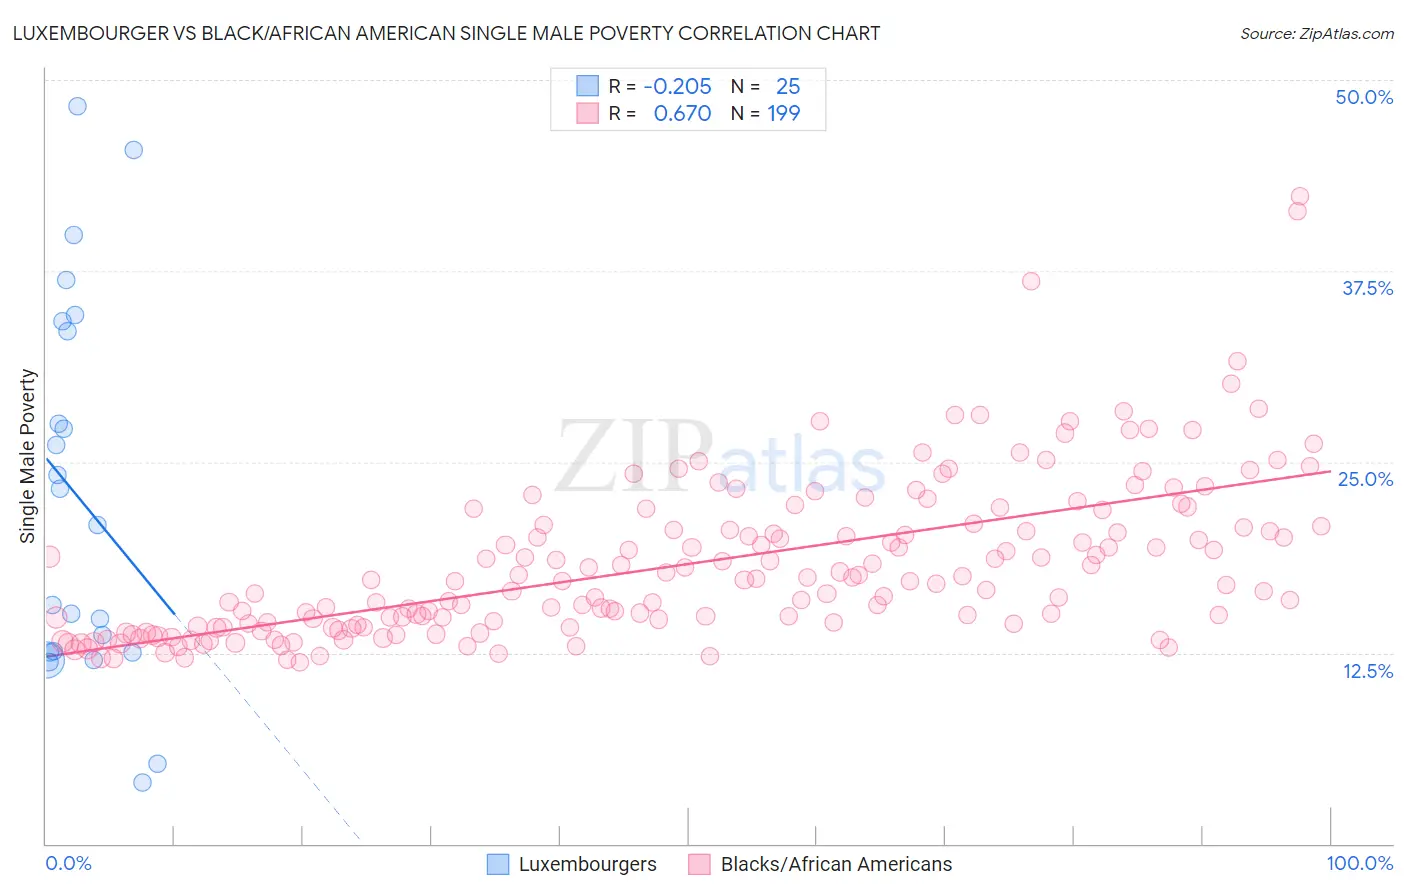 Luxembourger vs Black/African American Single Male Poverty